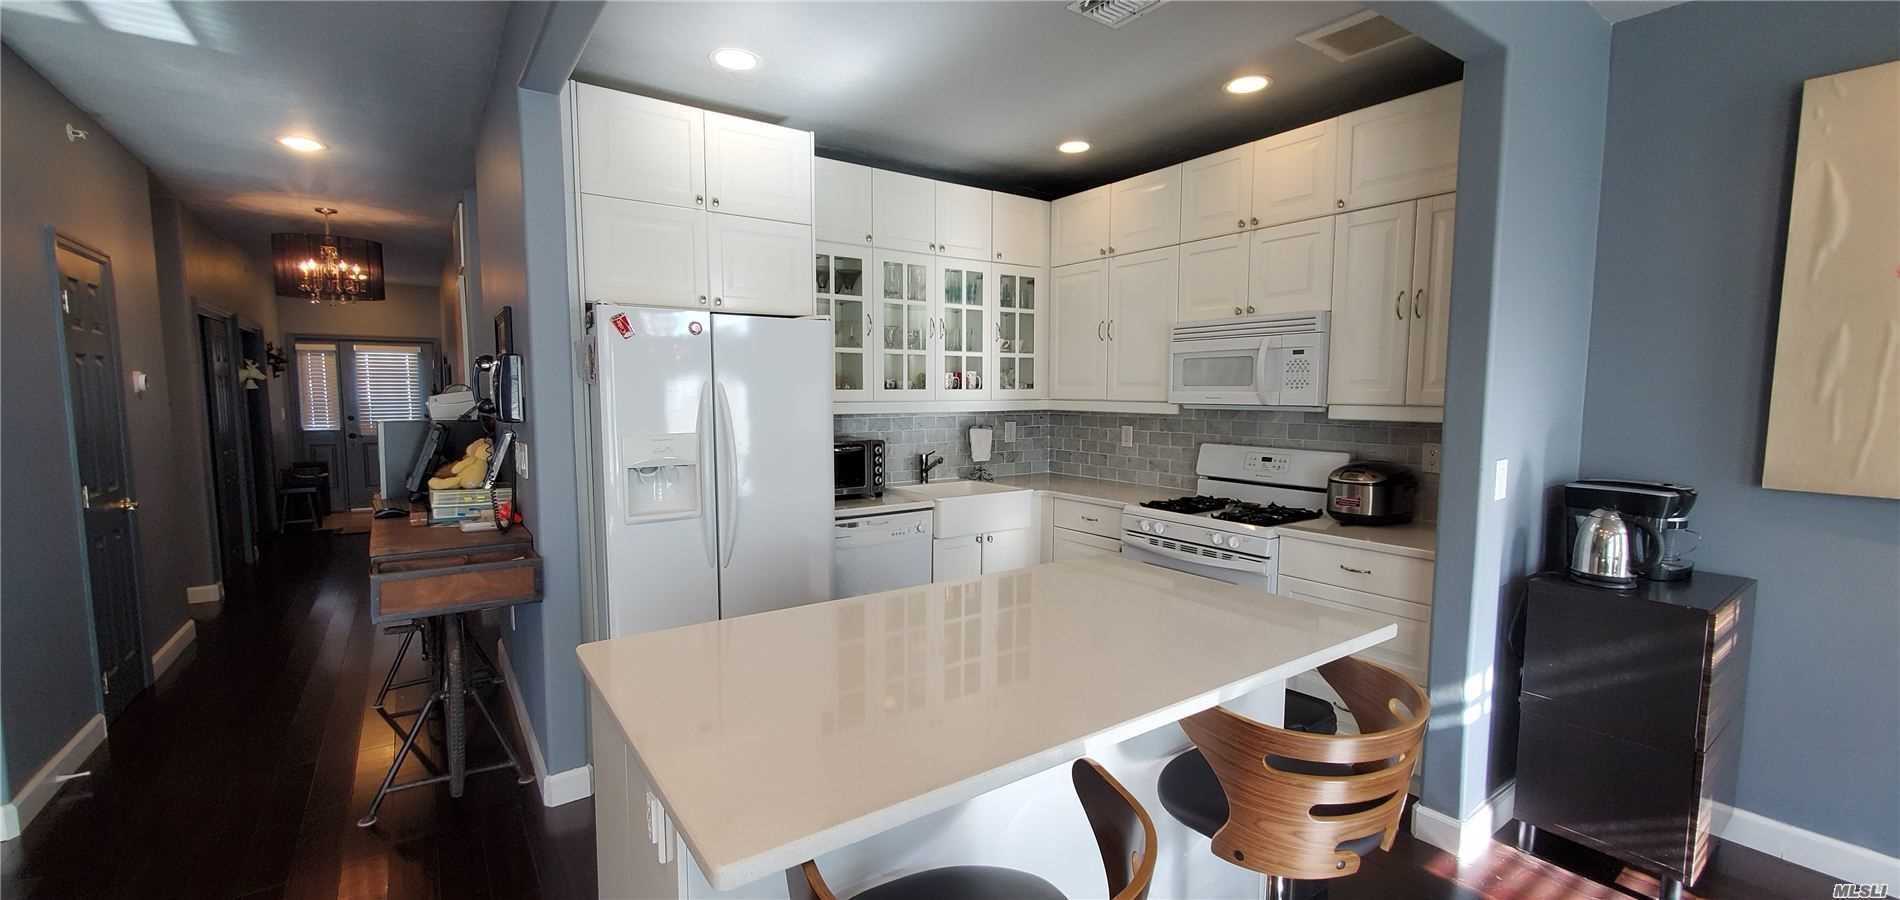 a kitchen with a refrigerator a stove top oven a sink dishwasher and white cabinets with wooden floor